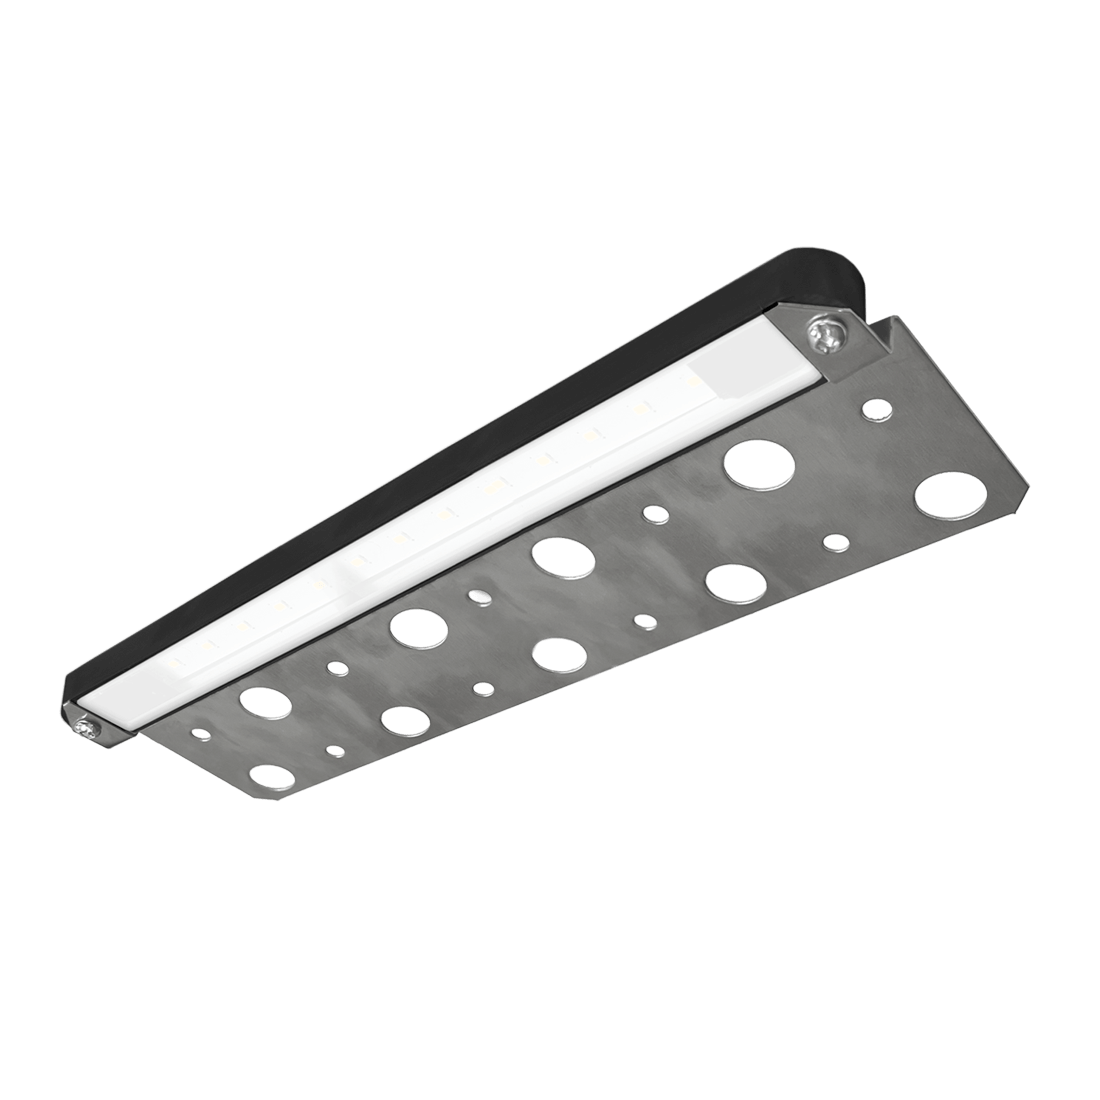 angled image of a 12 inch aluminum low profile outdoor landscape led light fixture.